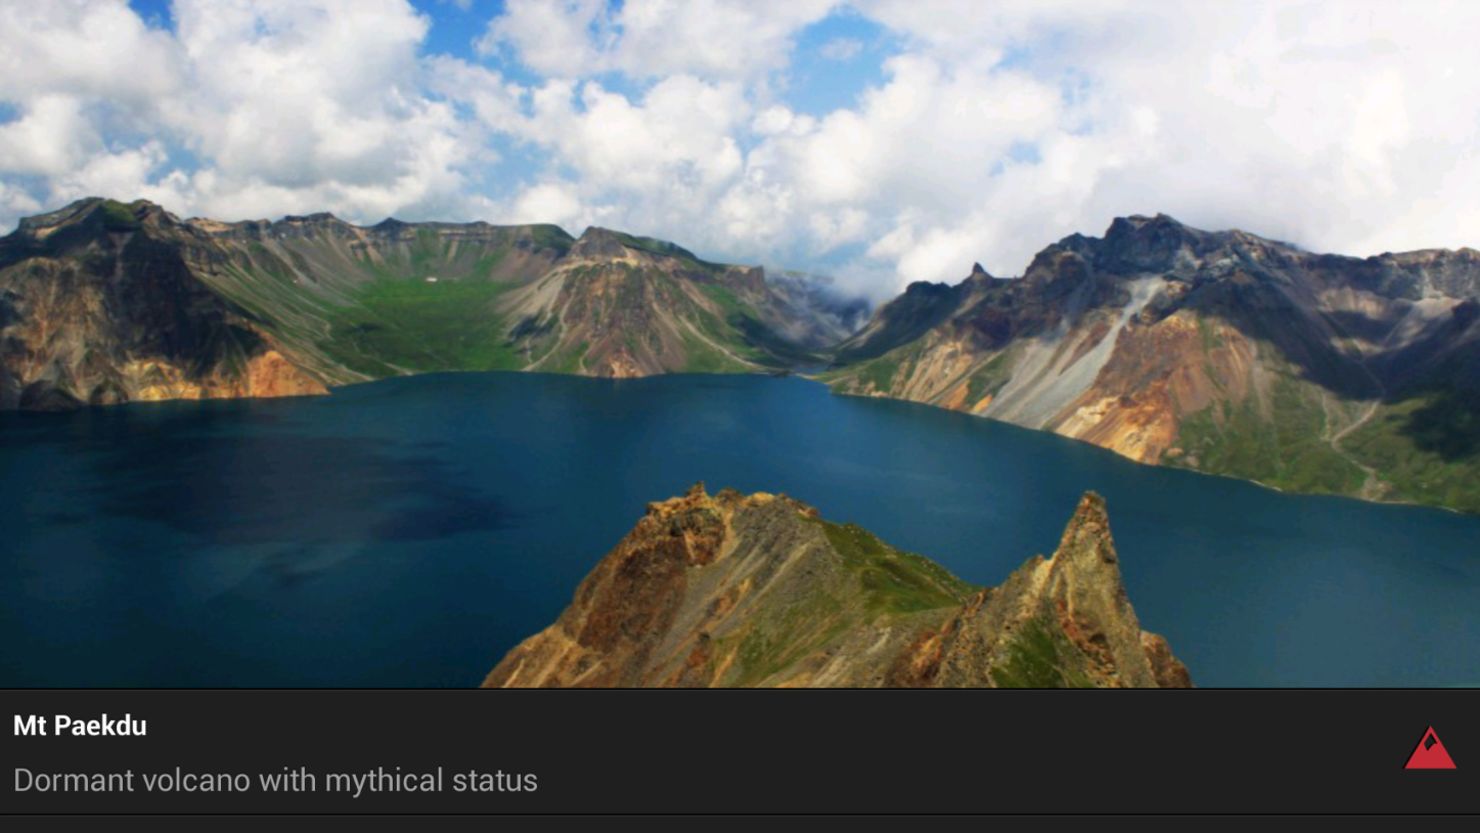 The North Korea Travel App covers more than 350 points of interest, including natural wonders like Mount Paekdu. 